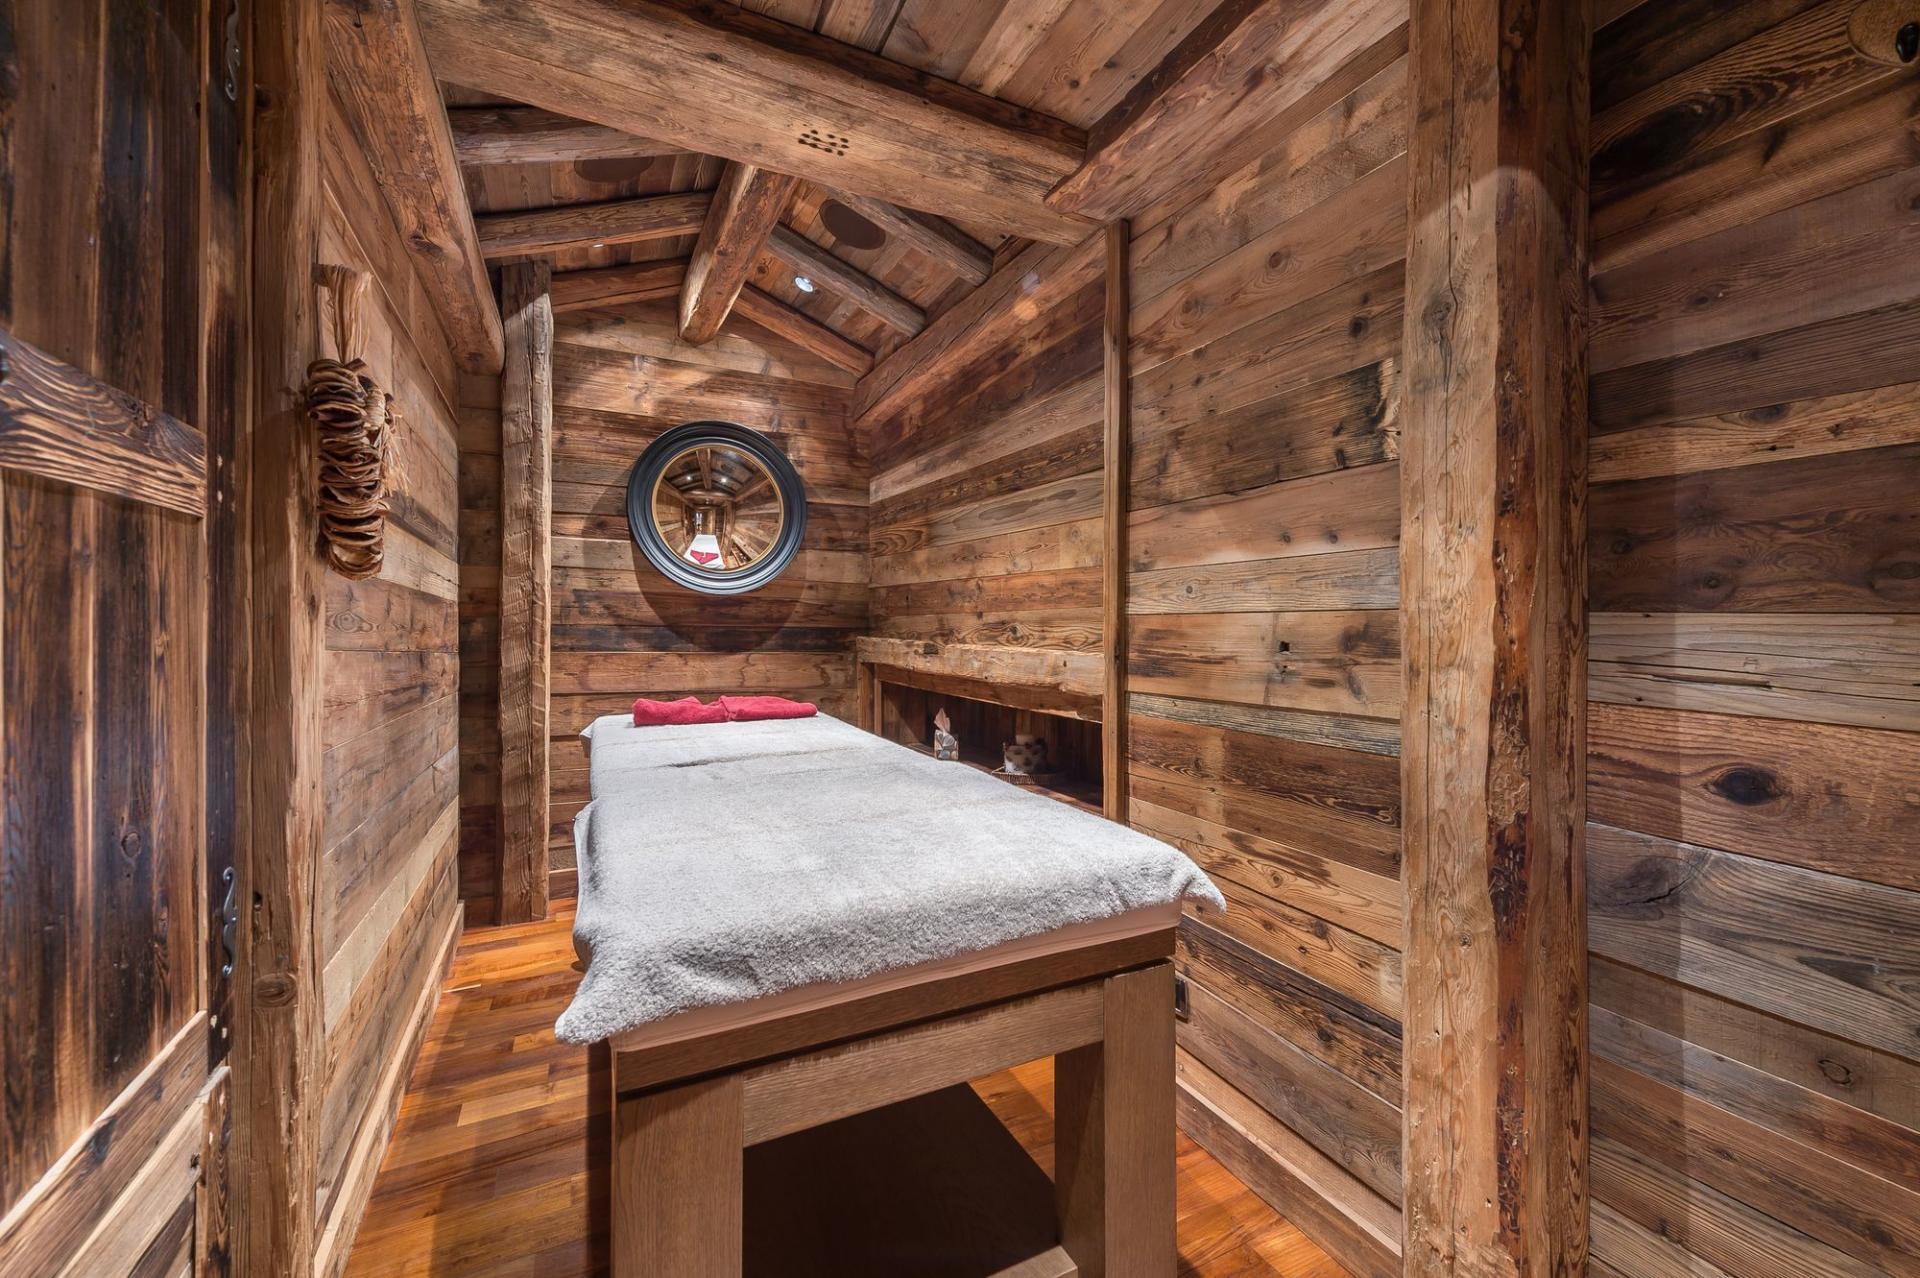 THE MASSAGE ROOM IN CHALET BELLECOTE